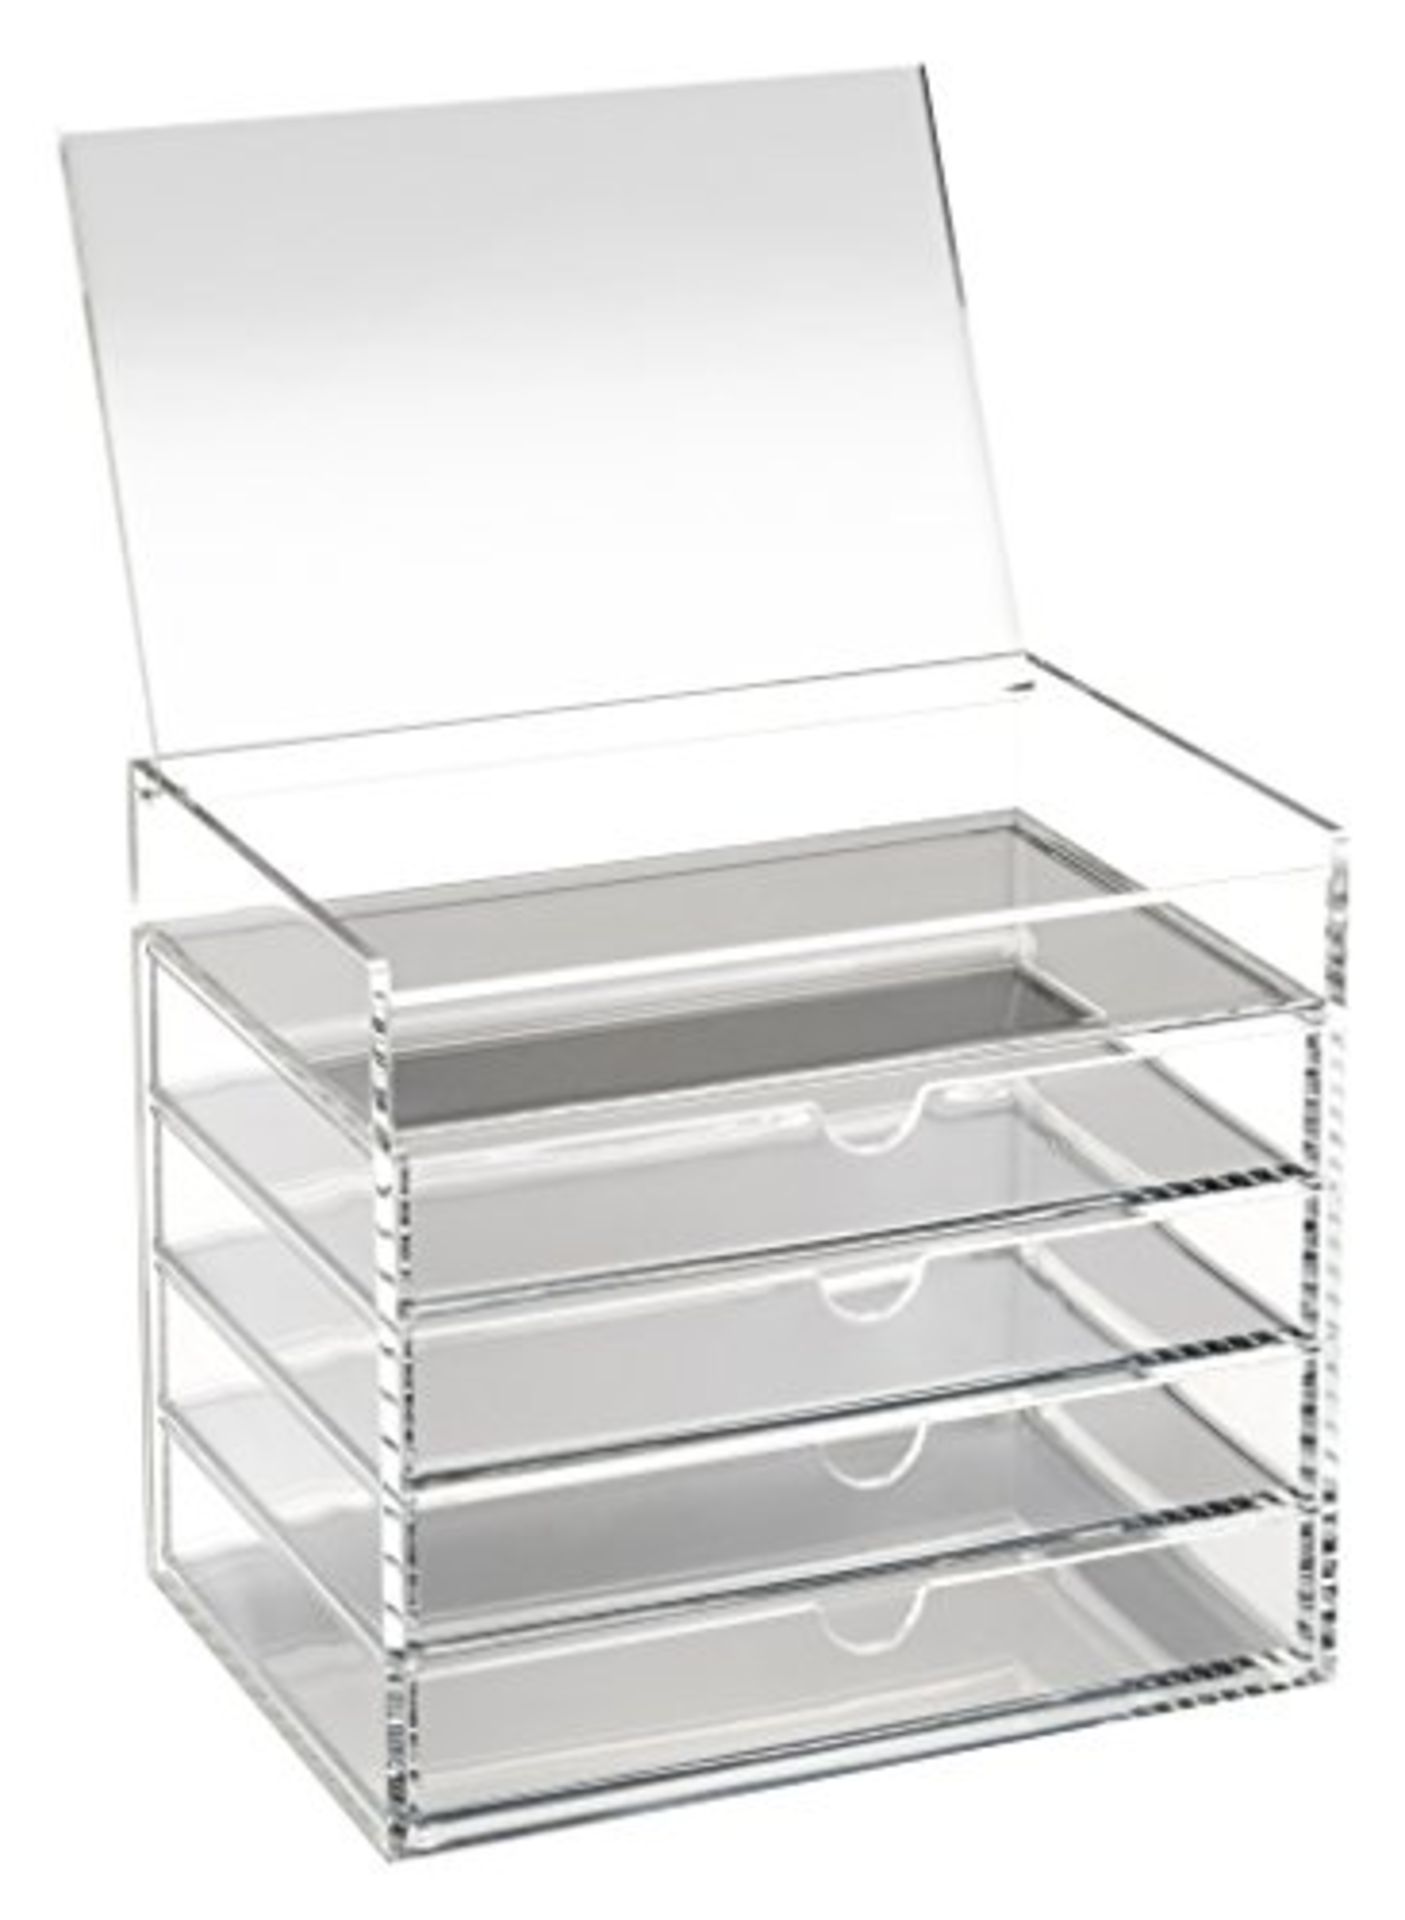 OSCO Acrylic 5 Drawer Chest with Flip-Up Lid